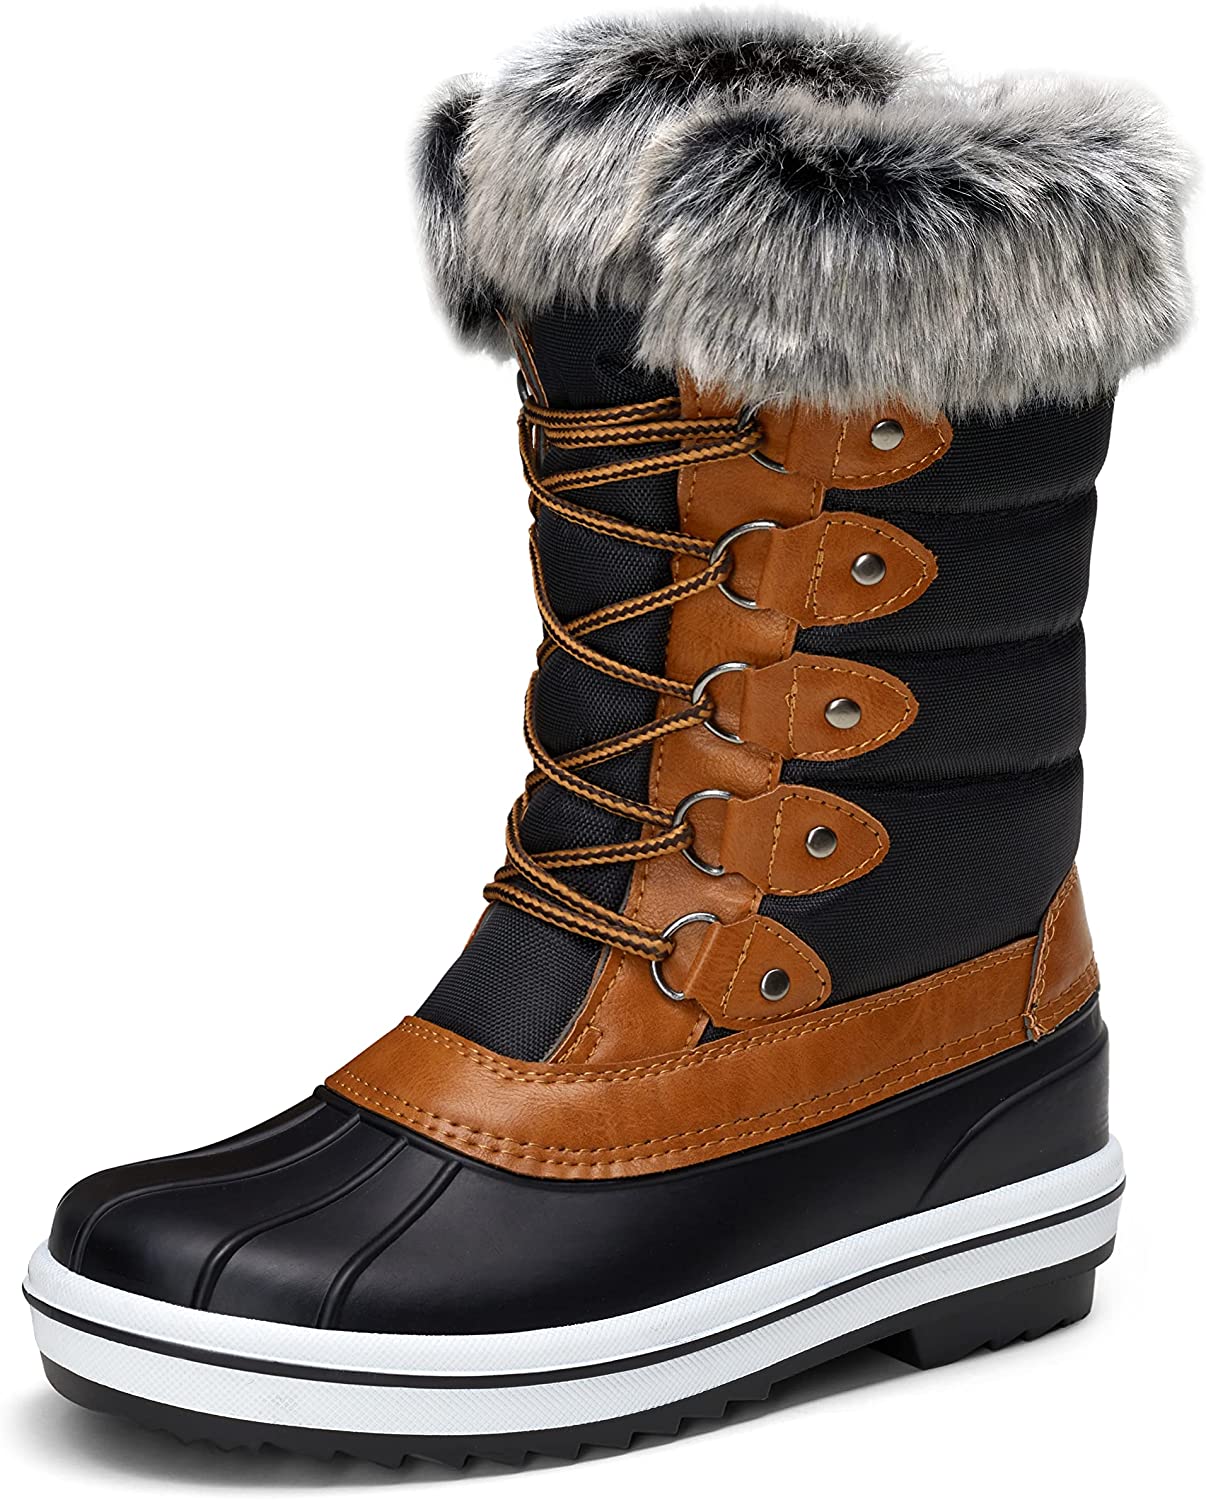 VEPOSE Womens Waterproof Snow Boots Mid Calf Lace Up Fur Shoes 